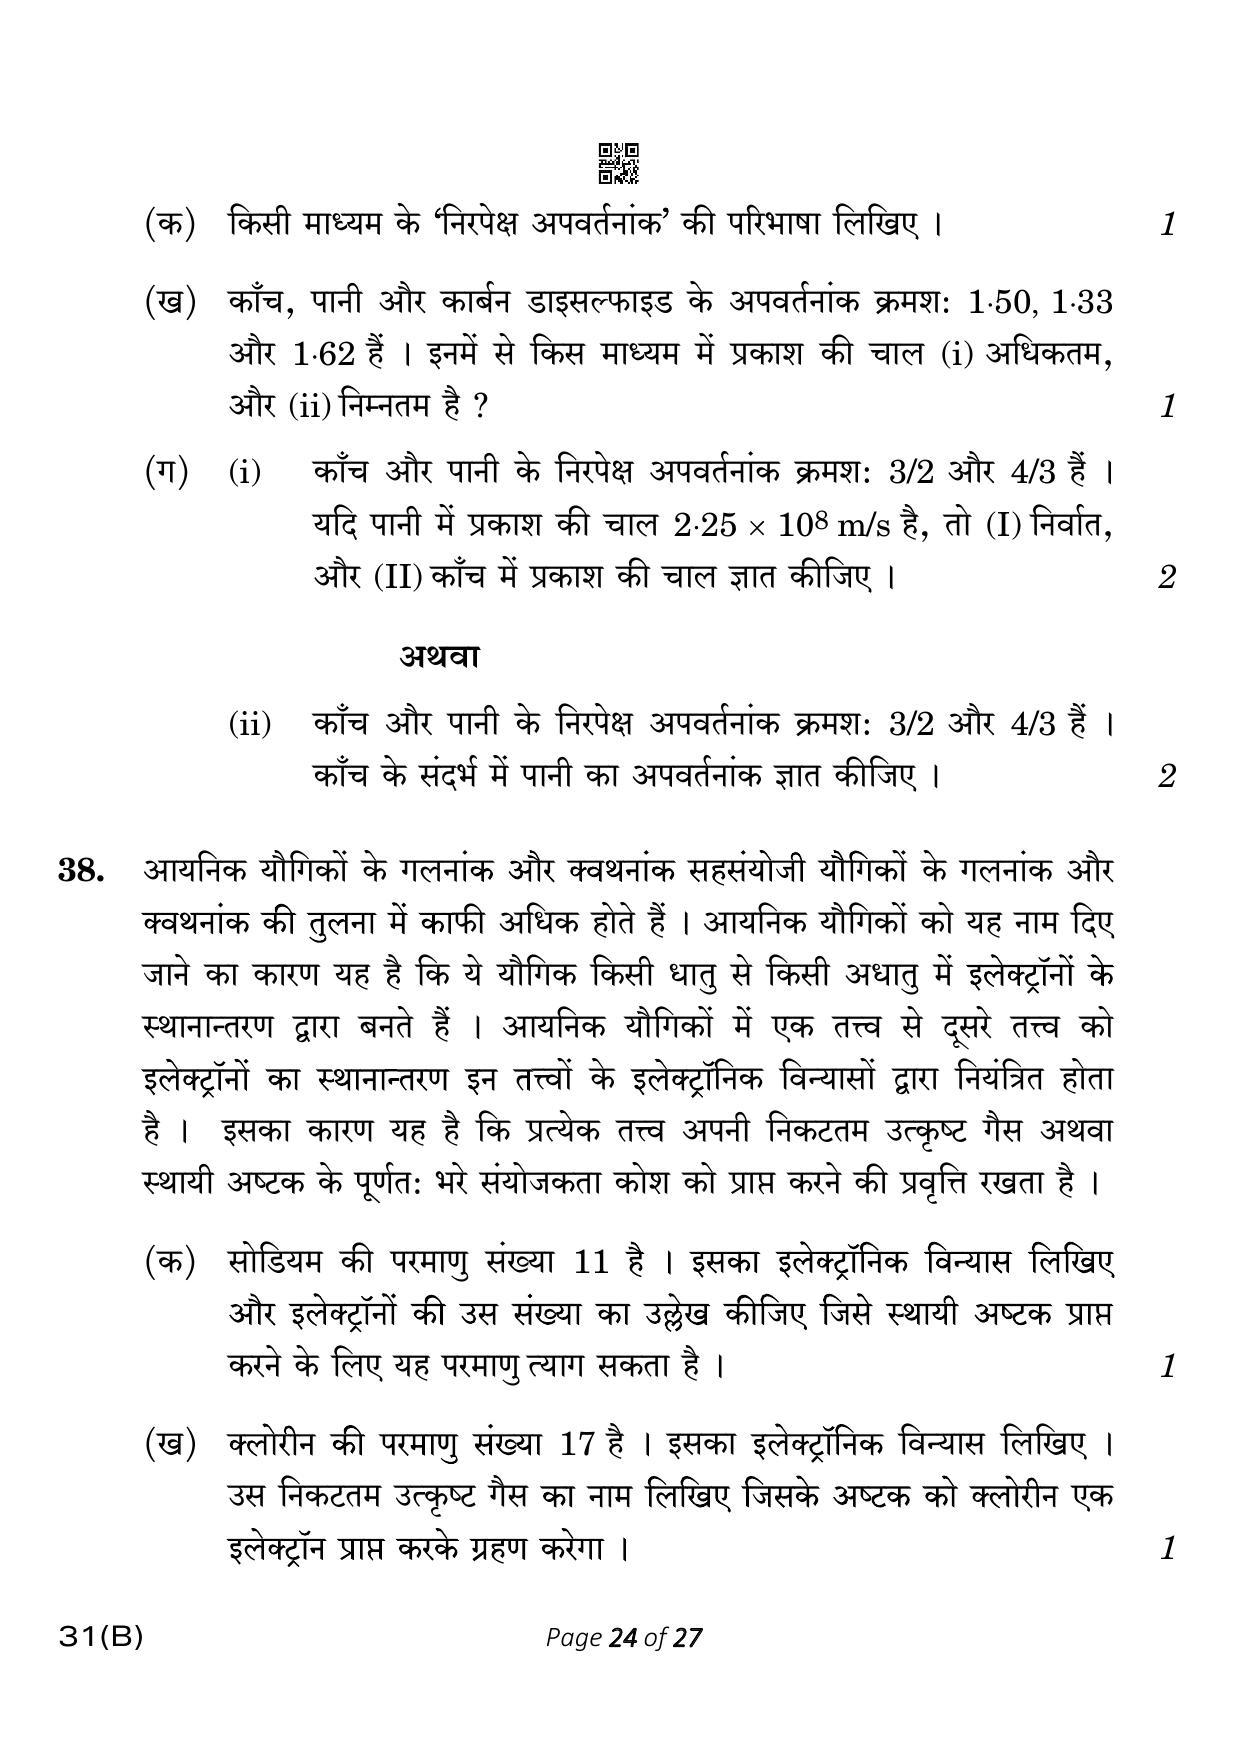 CBSE Class 10 31-B Science 2023 (Compartment) Question Paper - Page 24